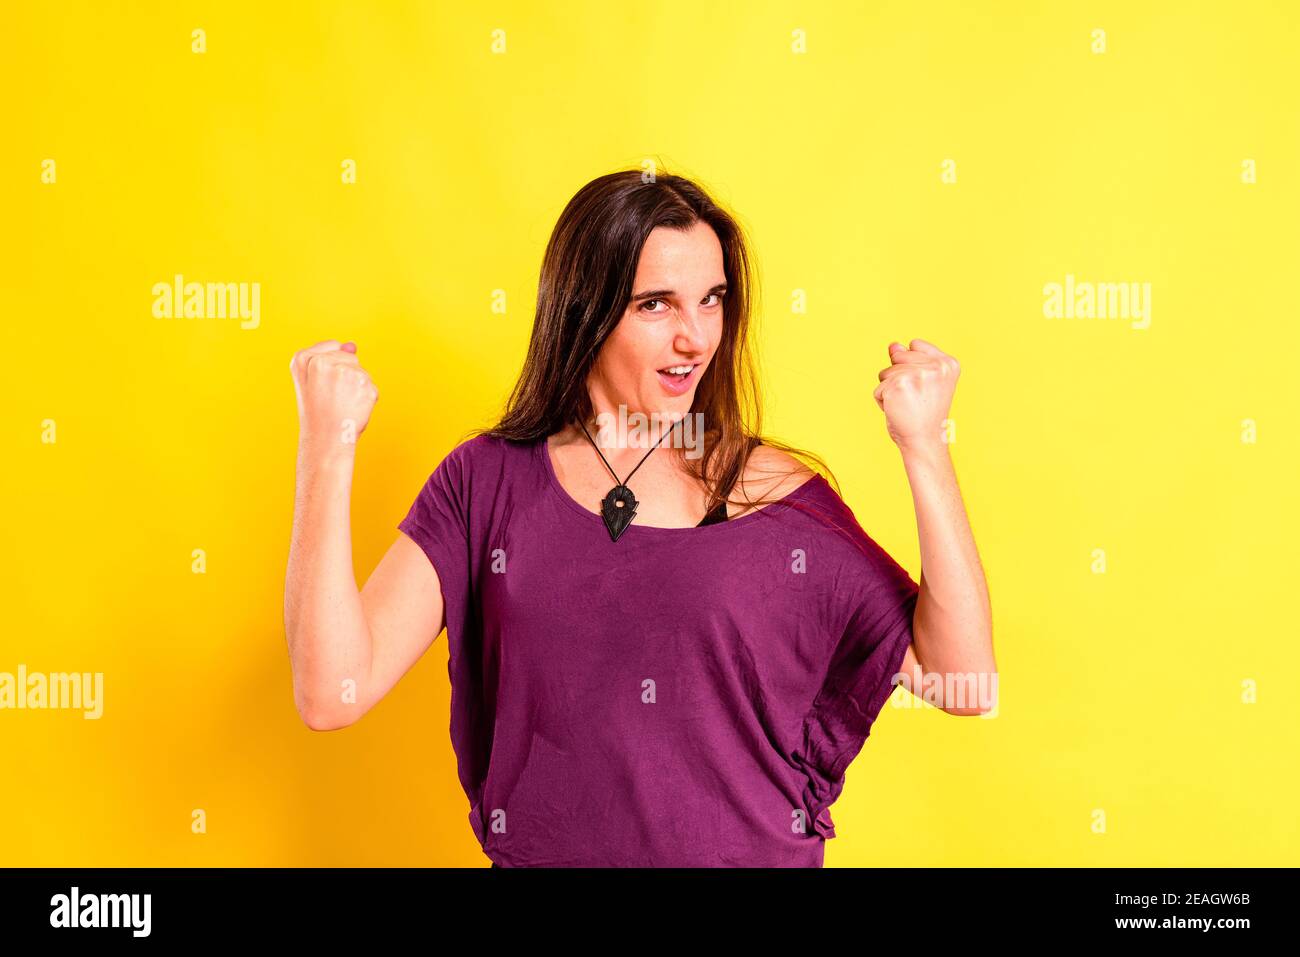 Young woman with proud attitude for a triumph and her achievements made by herself, isolated on yellow background. Stock Photo